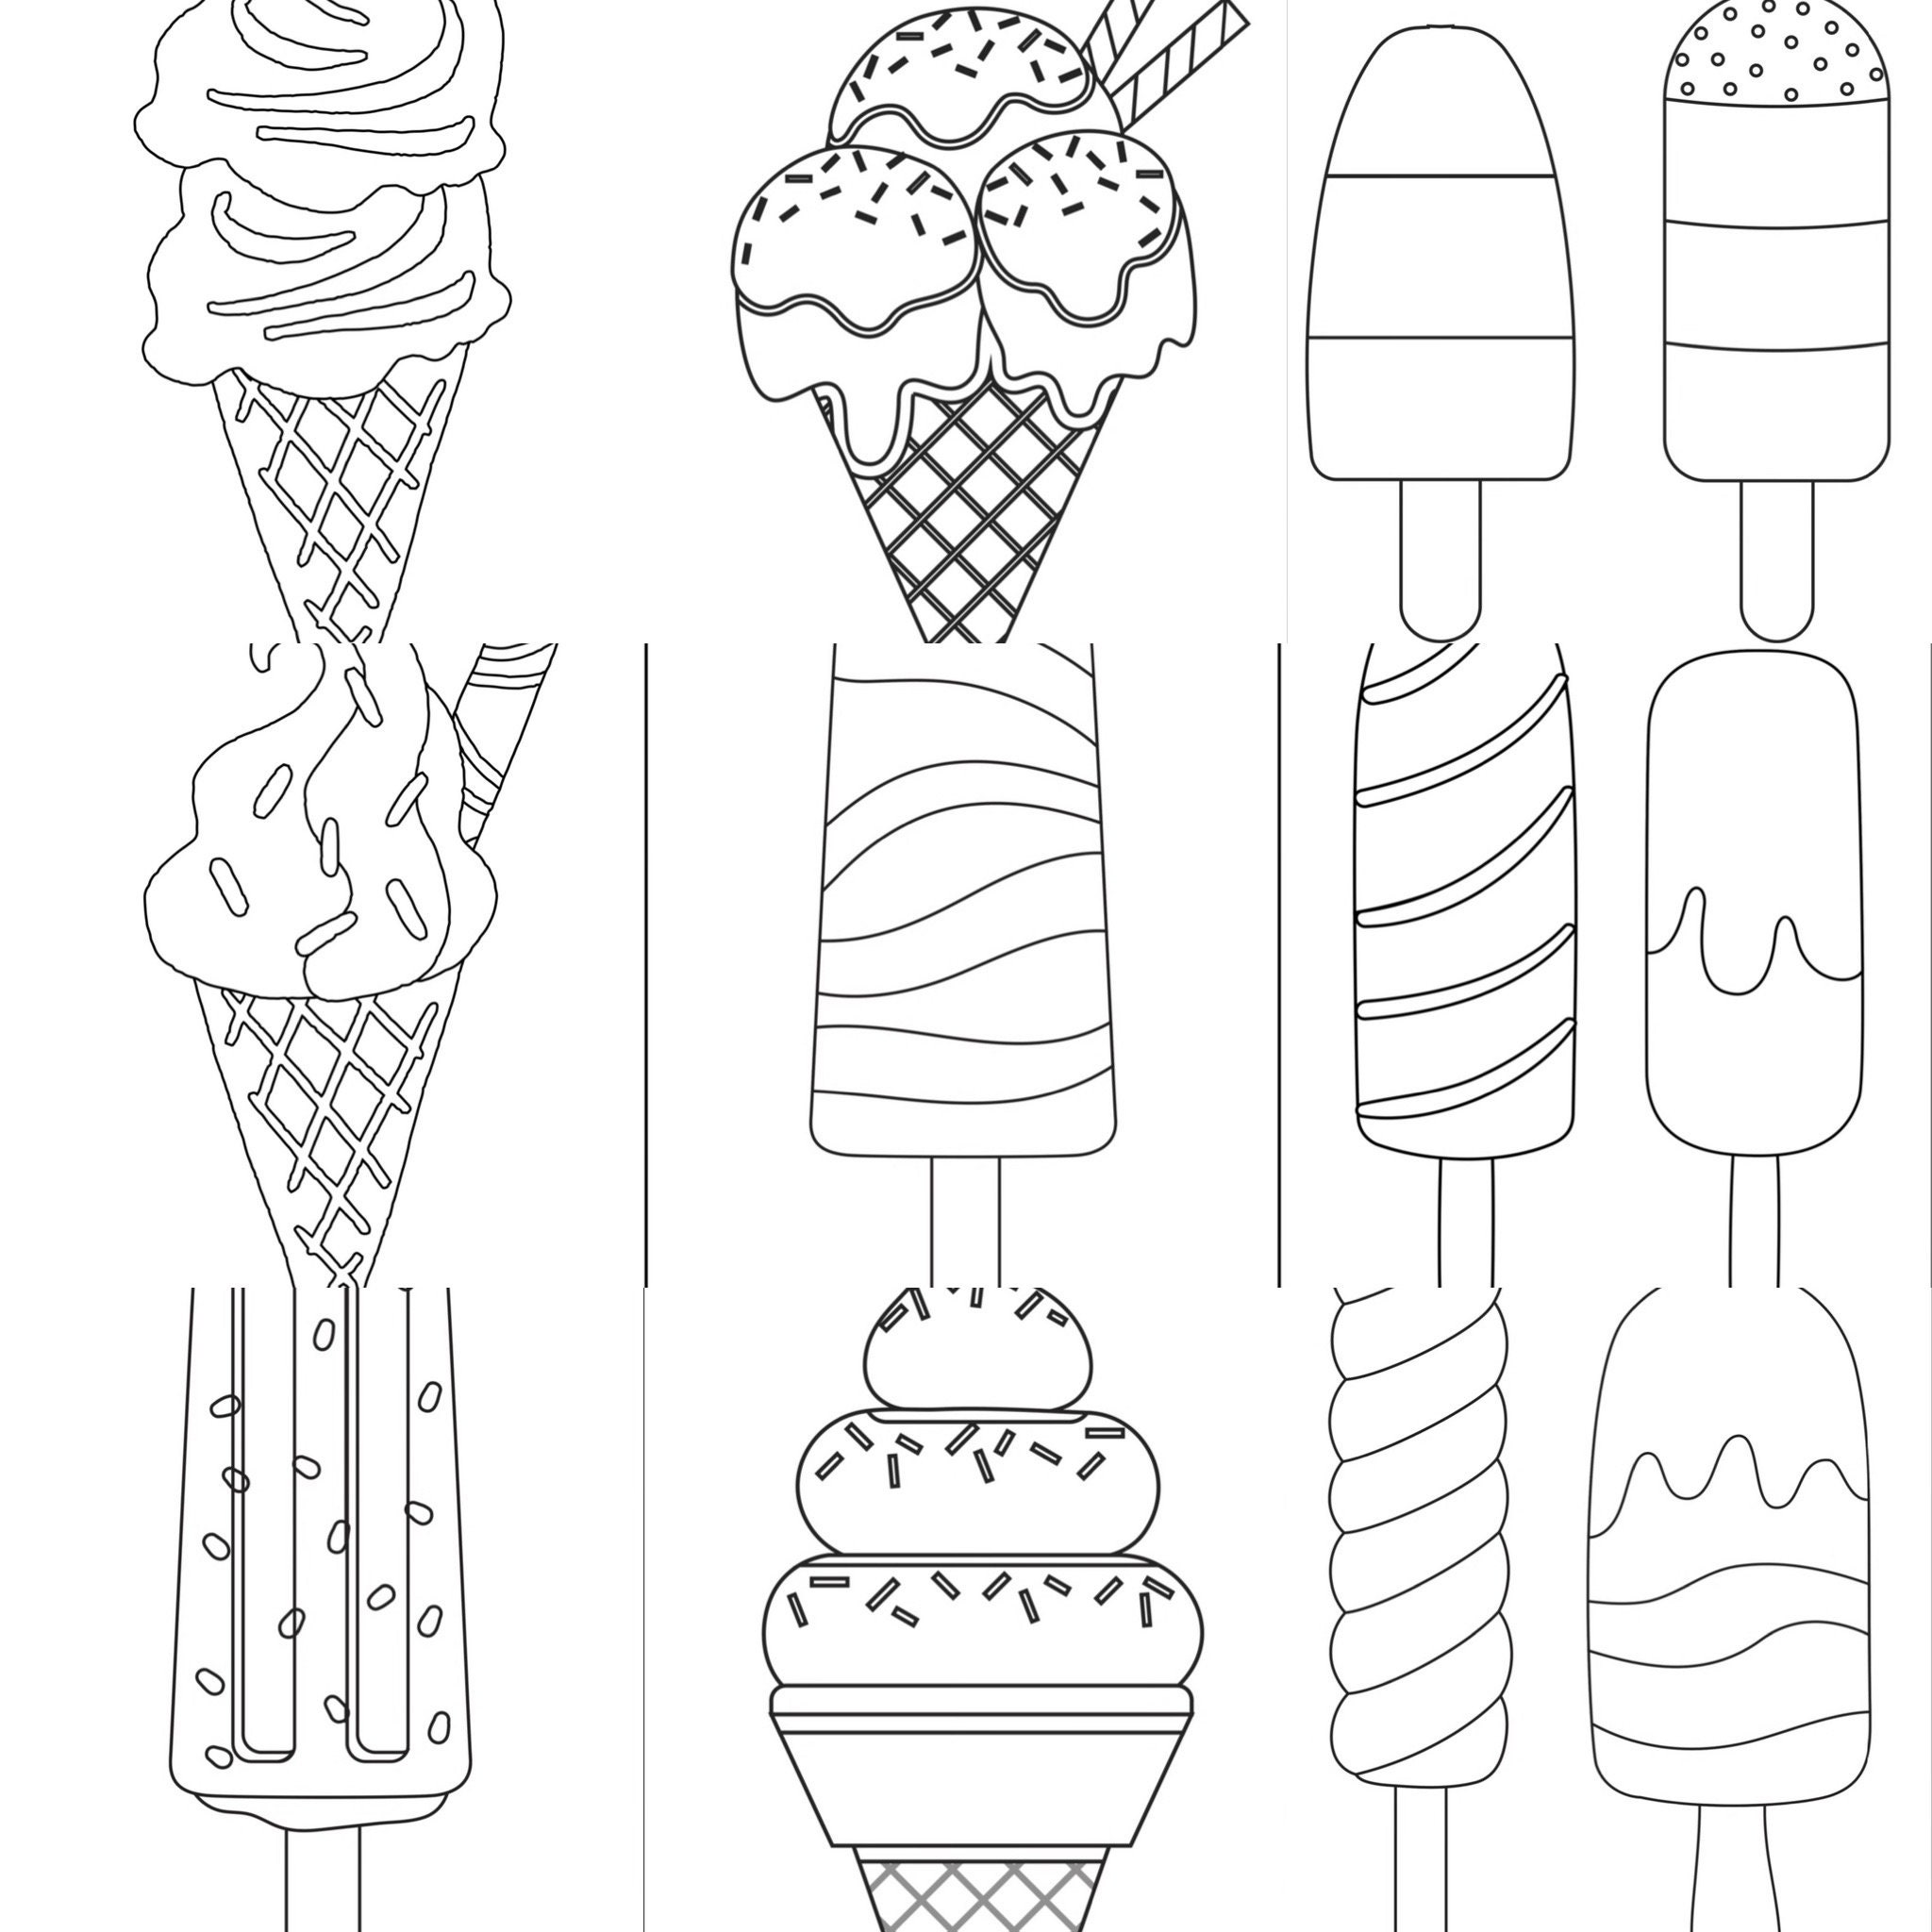 Kawaii Ice Cream Kids Coloring Pages Ice Cream Anime Art | Etsy